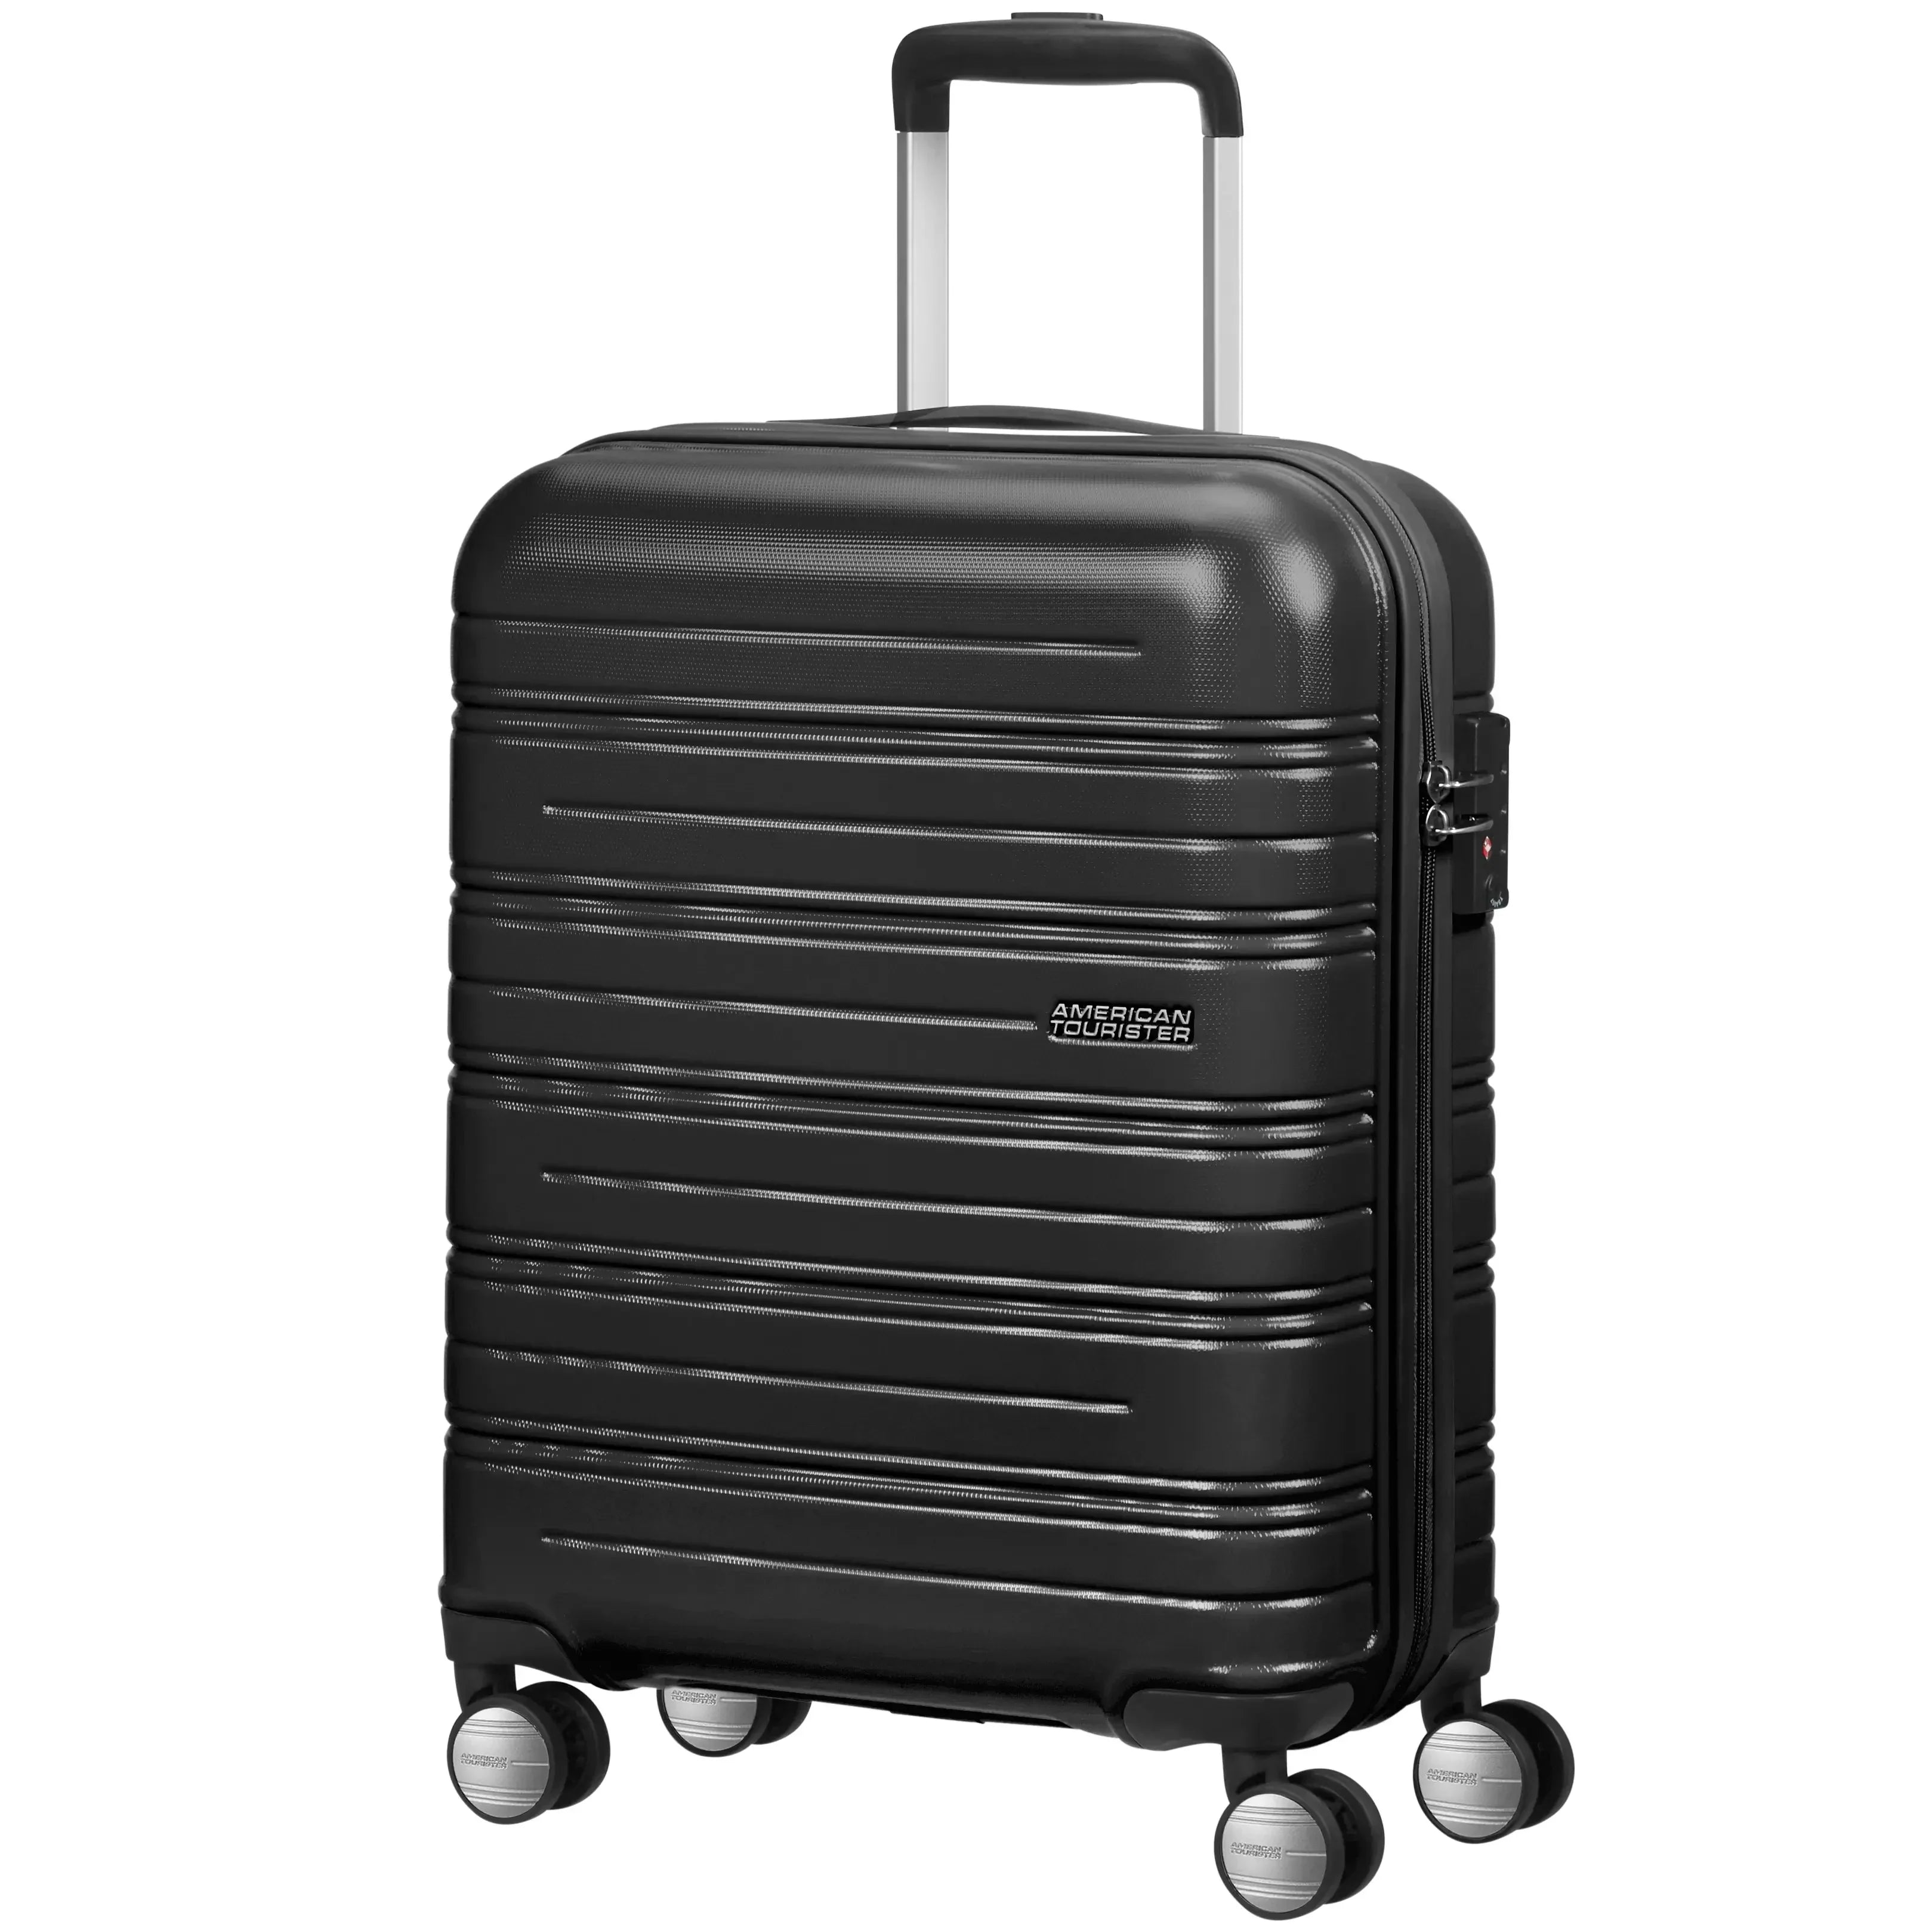 American Tourister High Turn trolley 4 roues 55 cm - univers noir